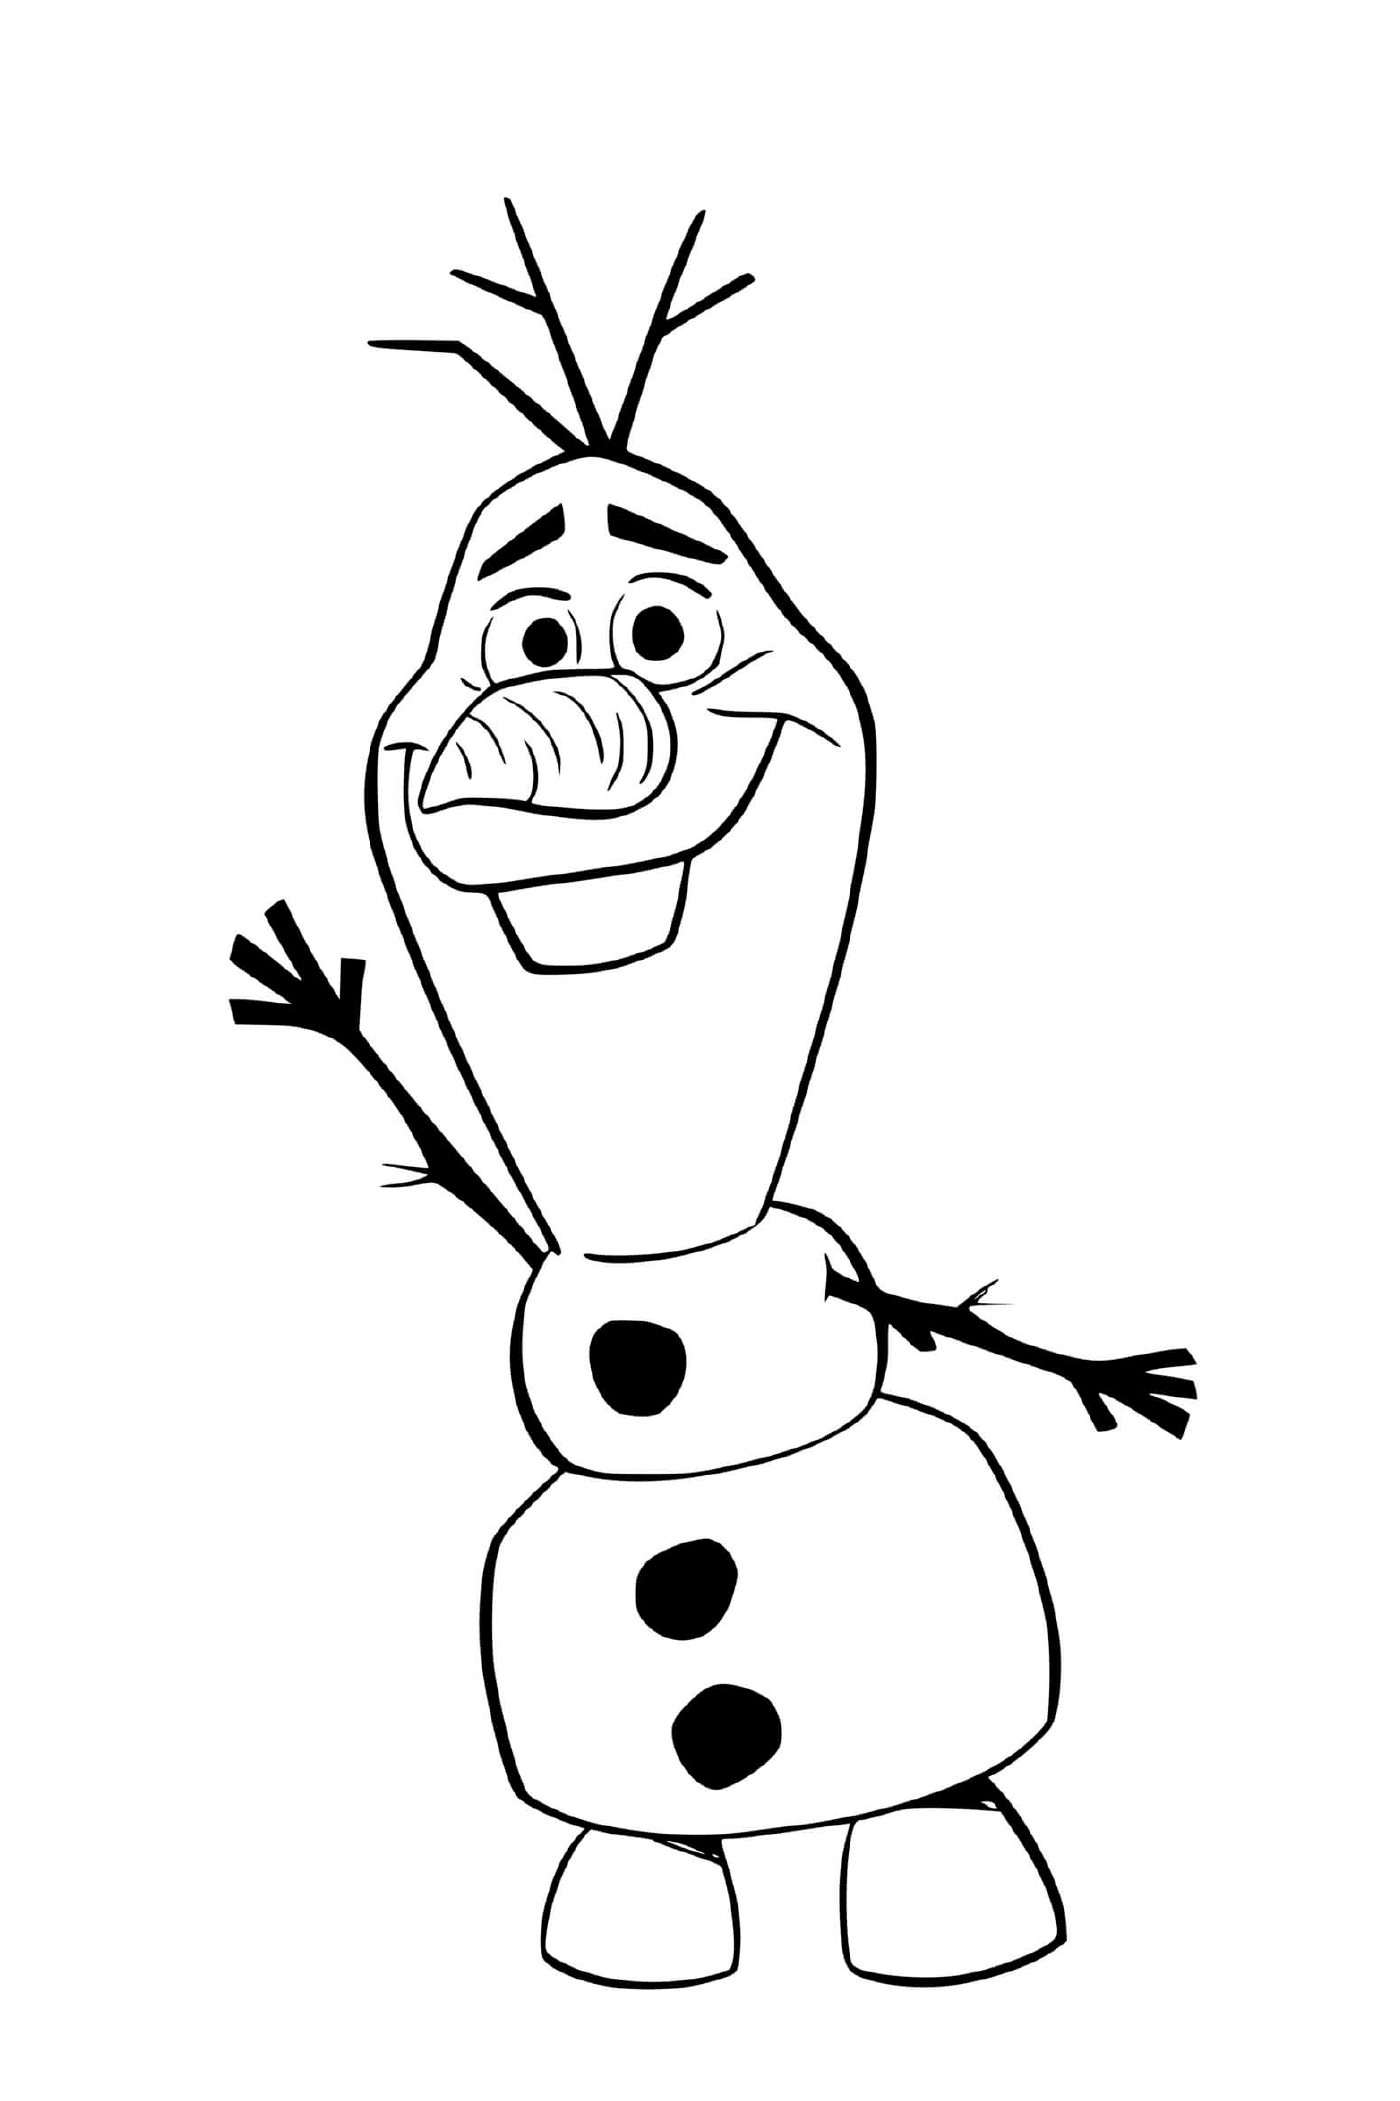  Olaf in the kingdom of Arendelle 